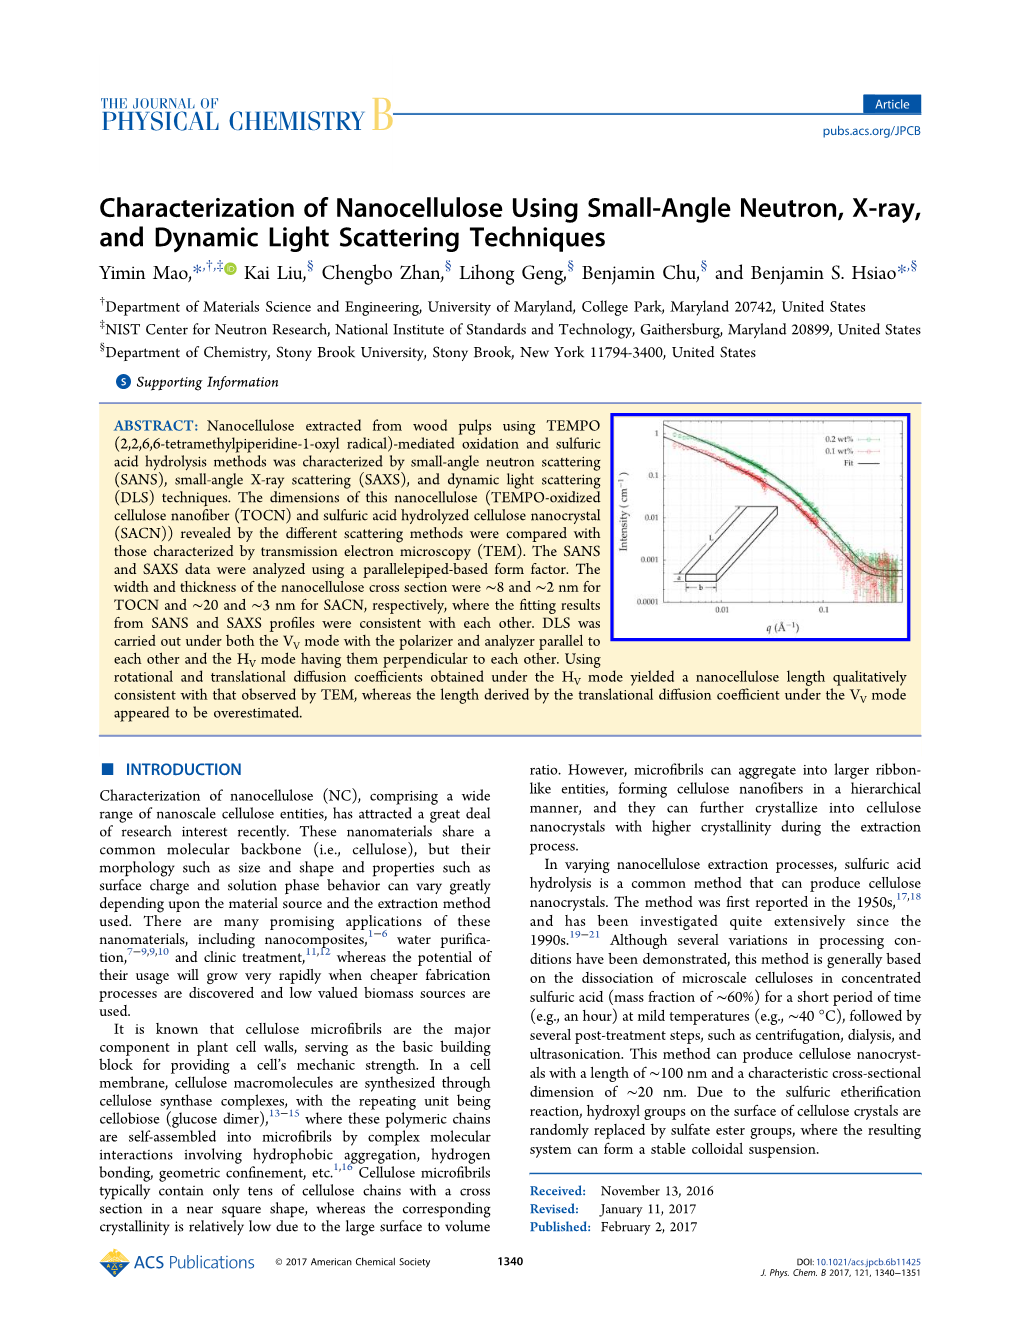 Characterization of Nanocellulose Using Small-Angle Neutron, X-Ray, and Dynamic Light Scattering Techniques